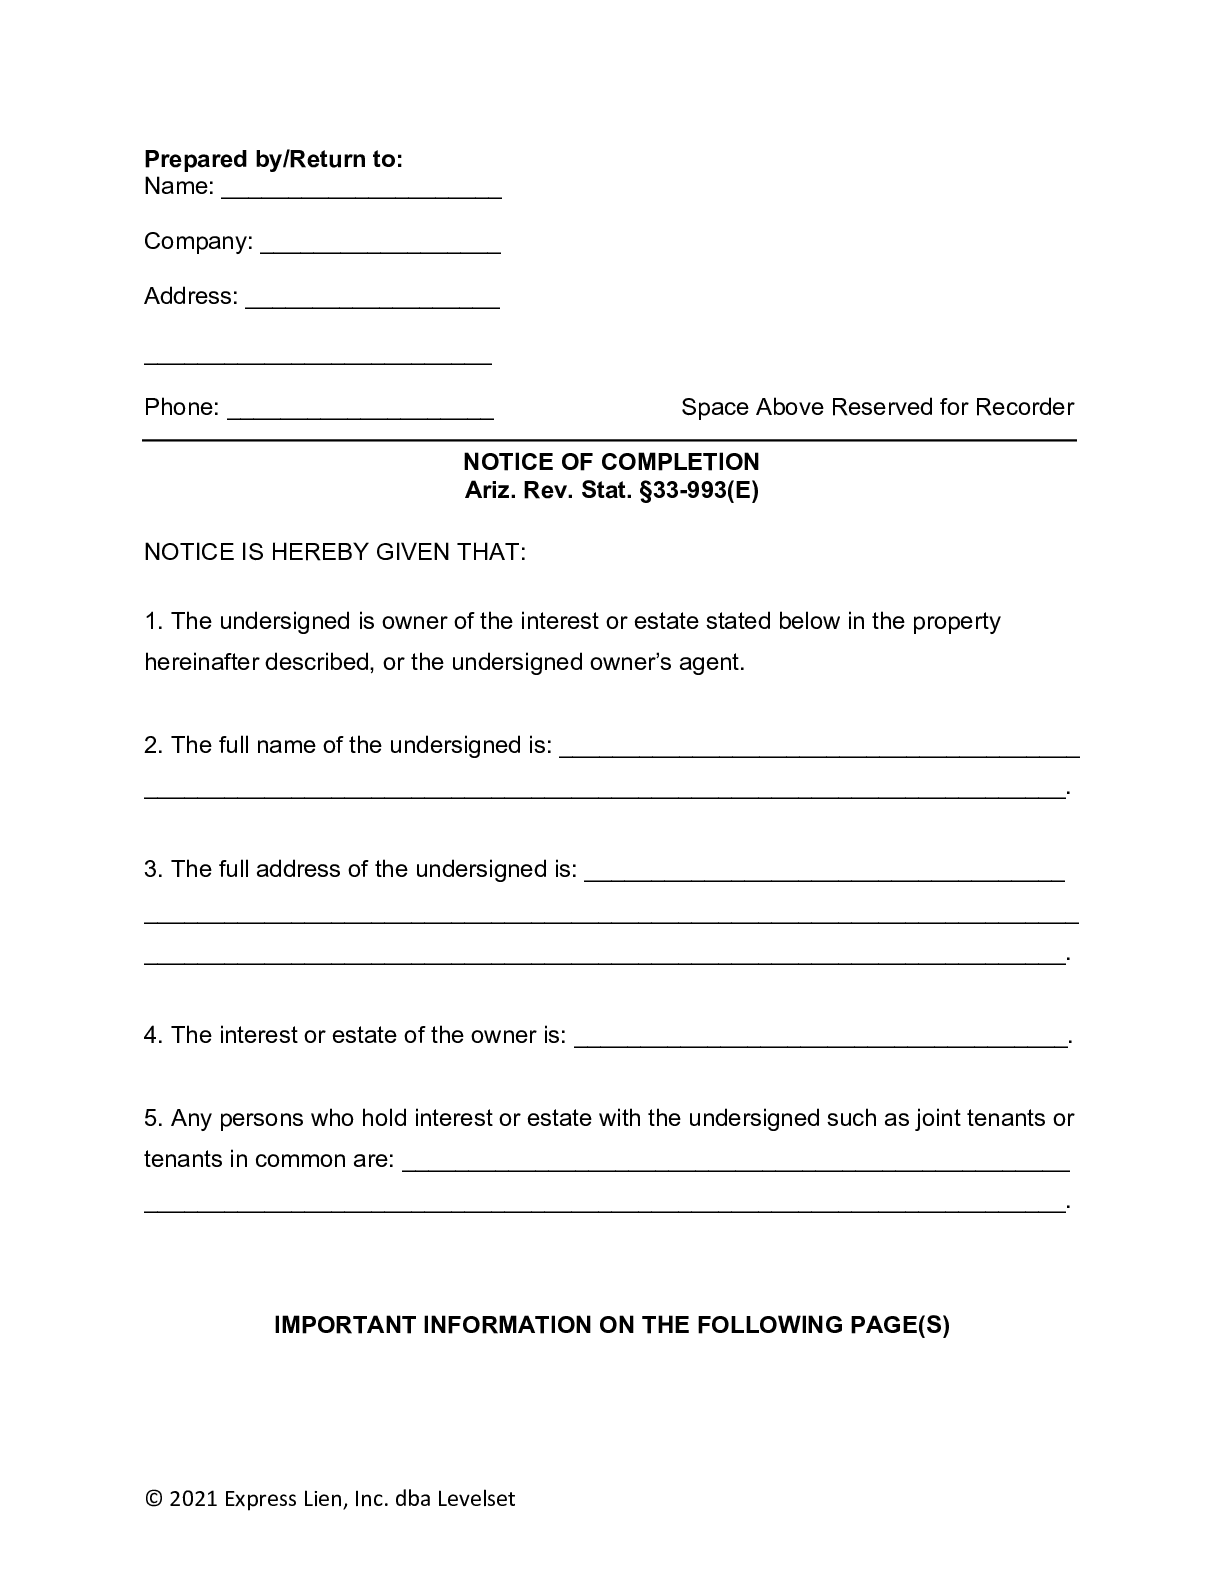 Arizona Notice of Completion Form - free from